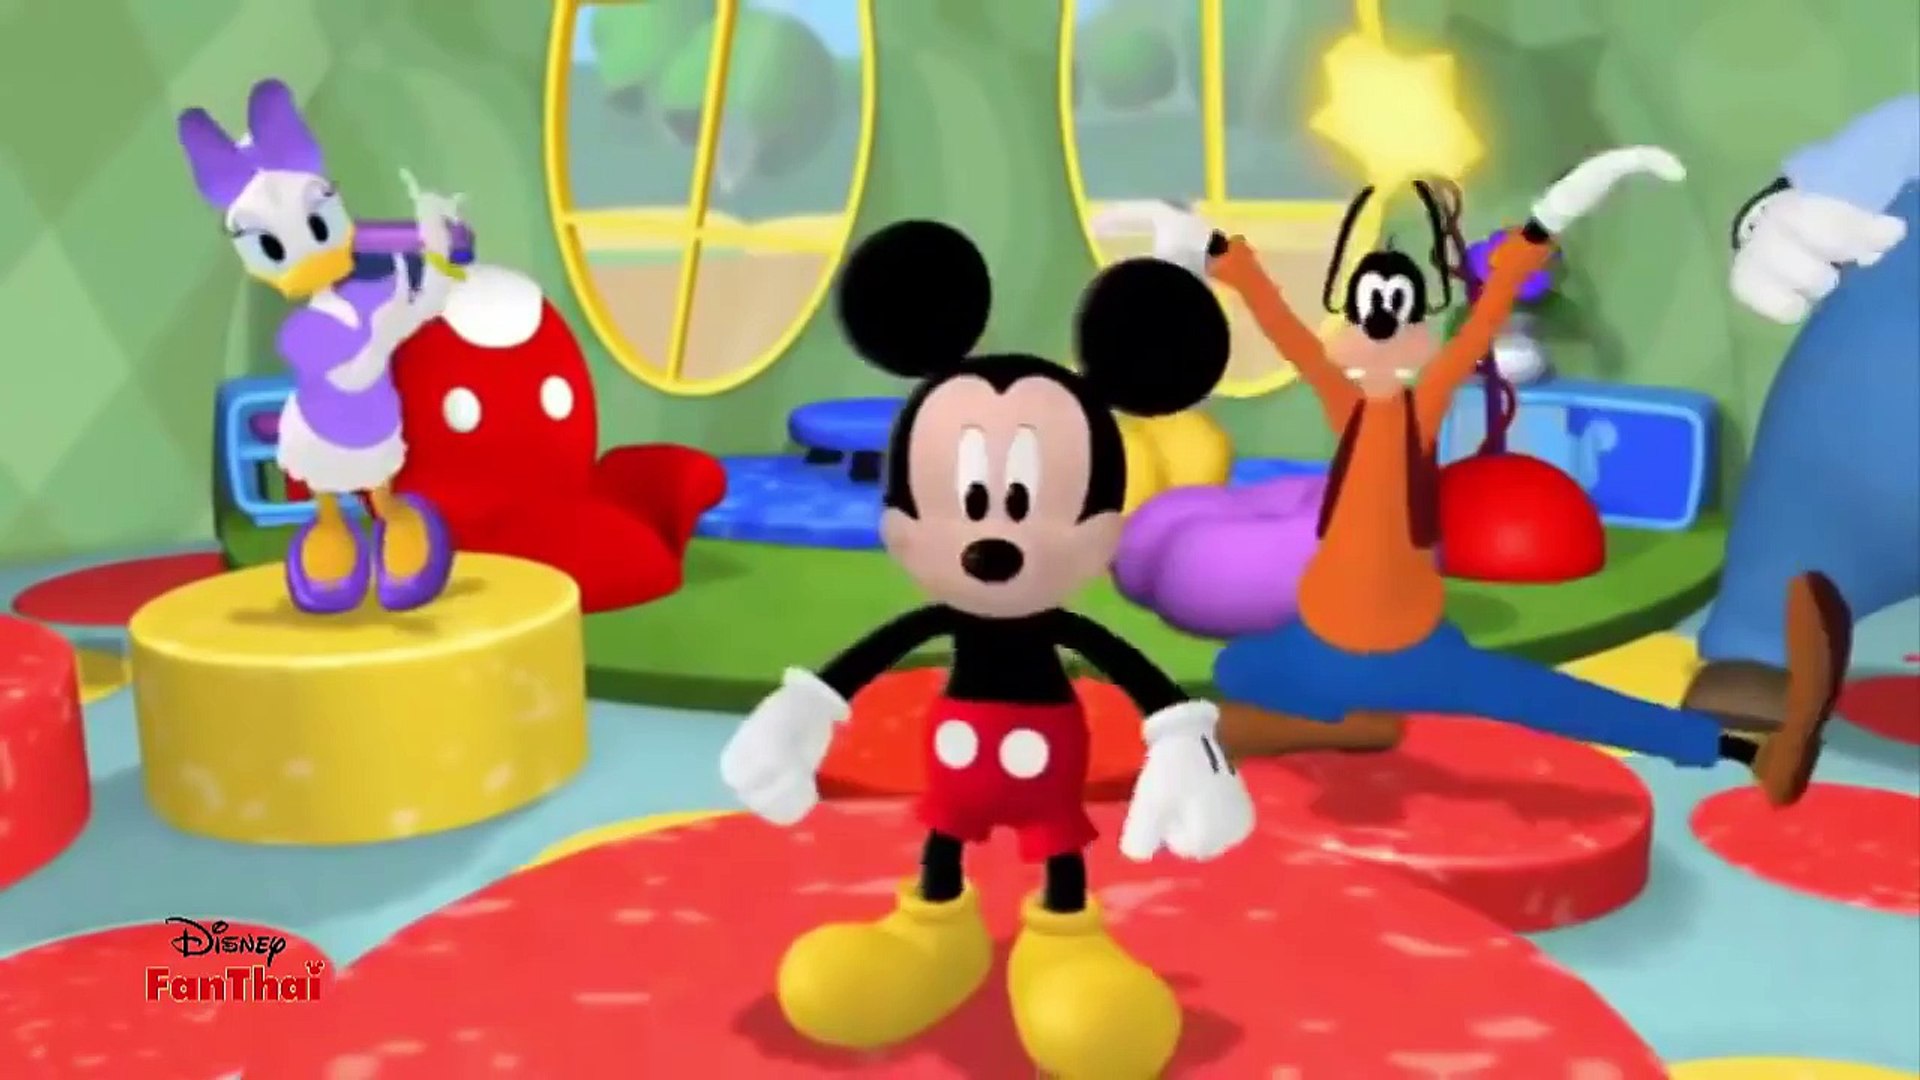 Mickey mouse hot dog song.